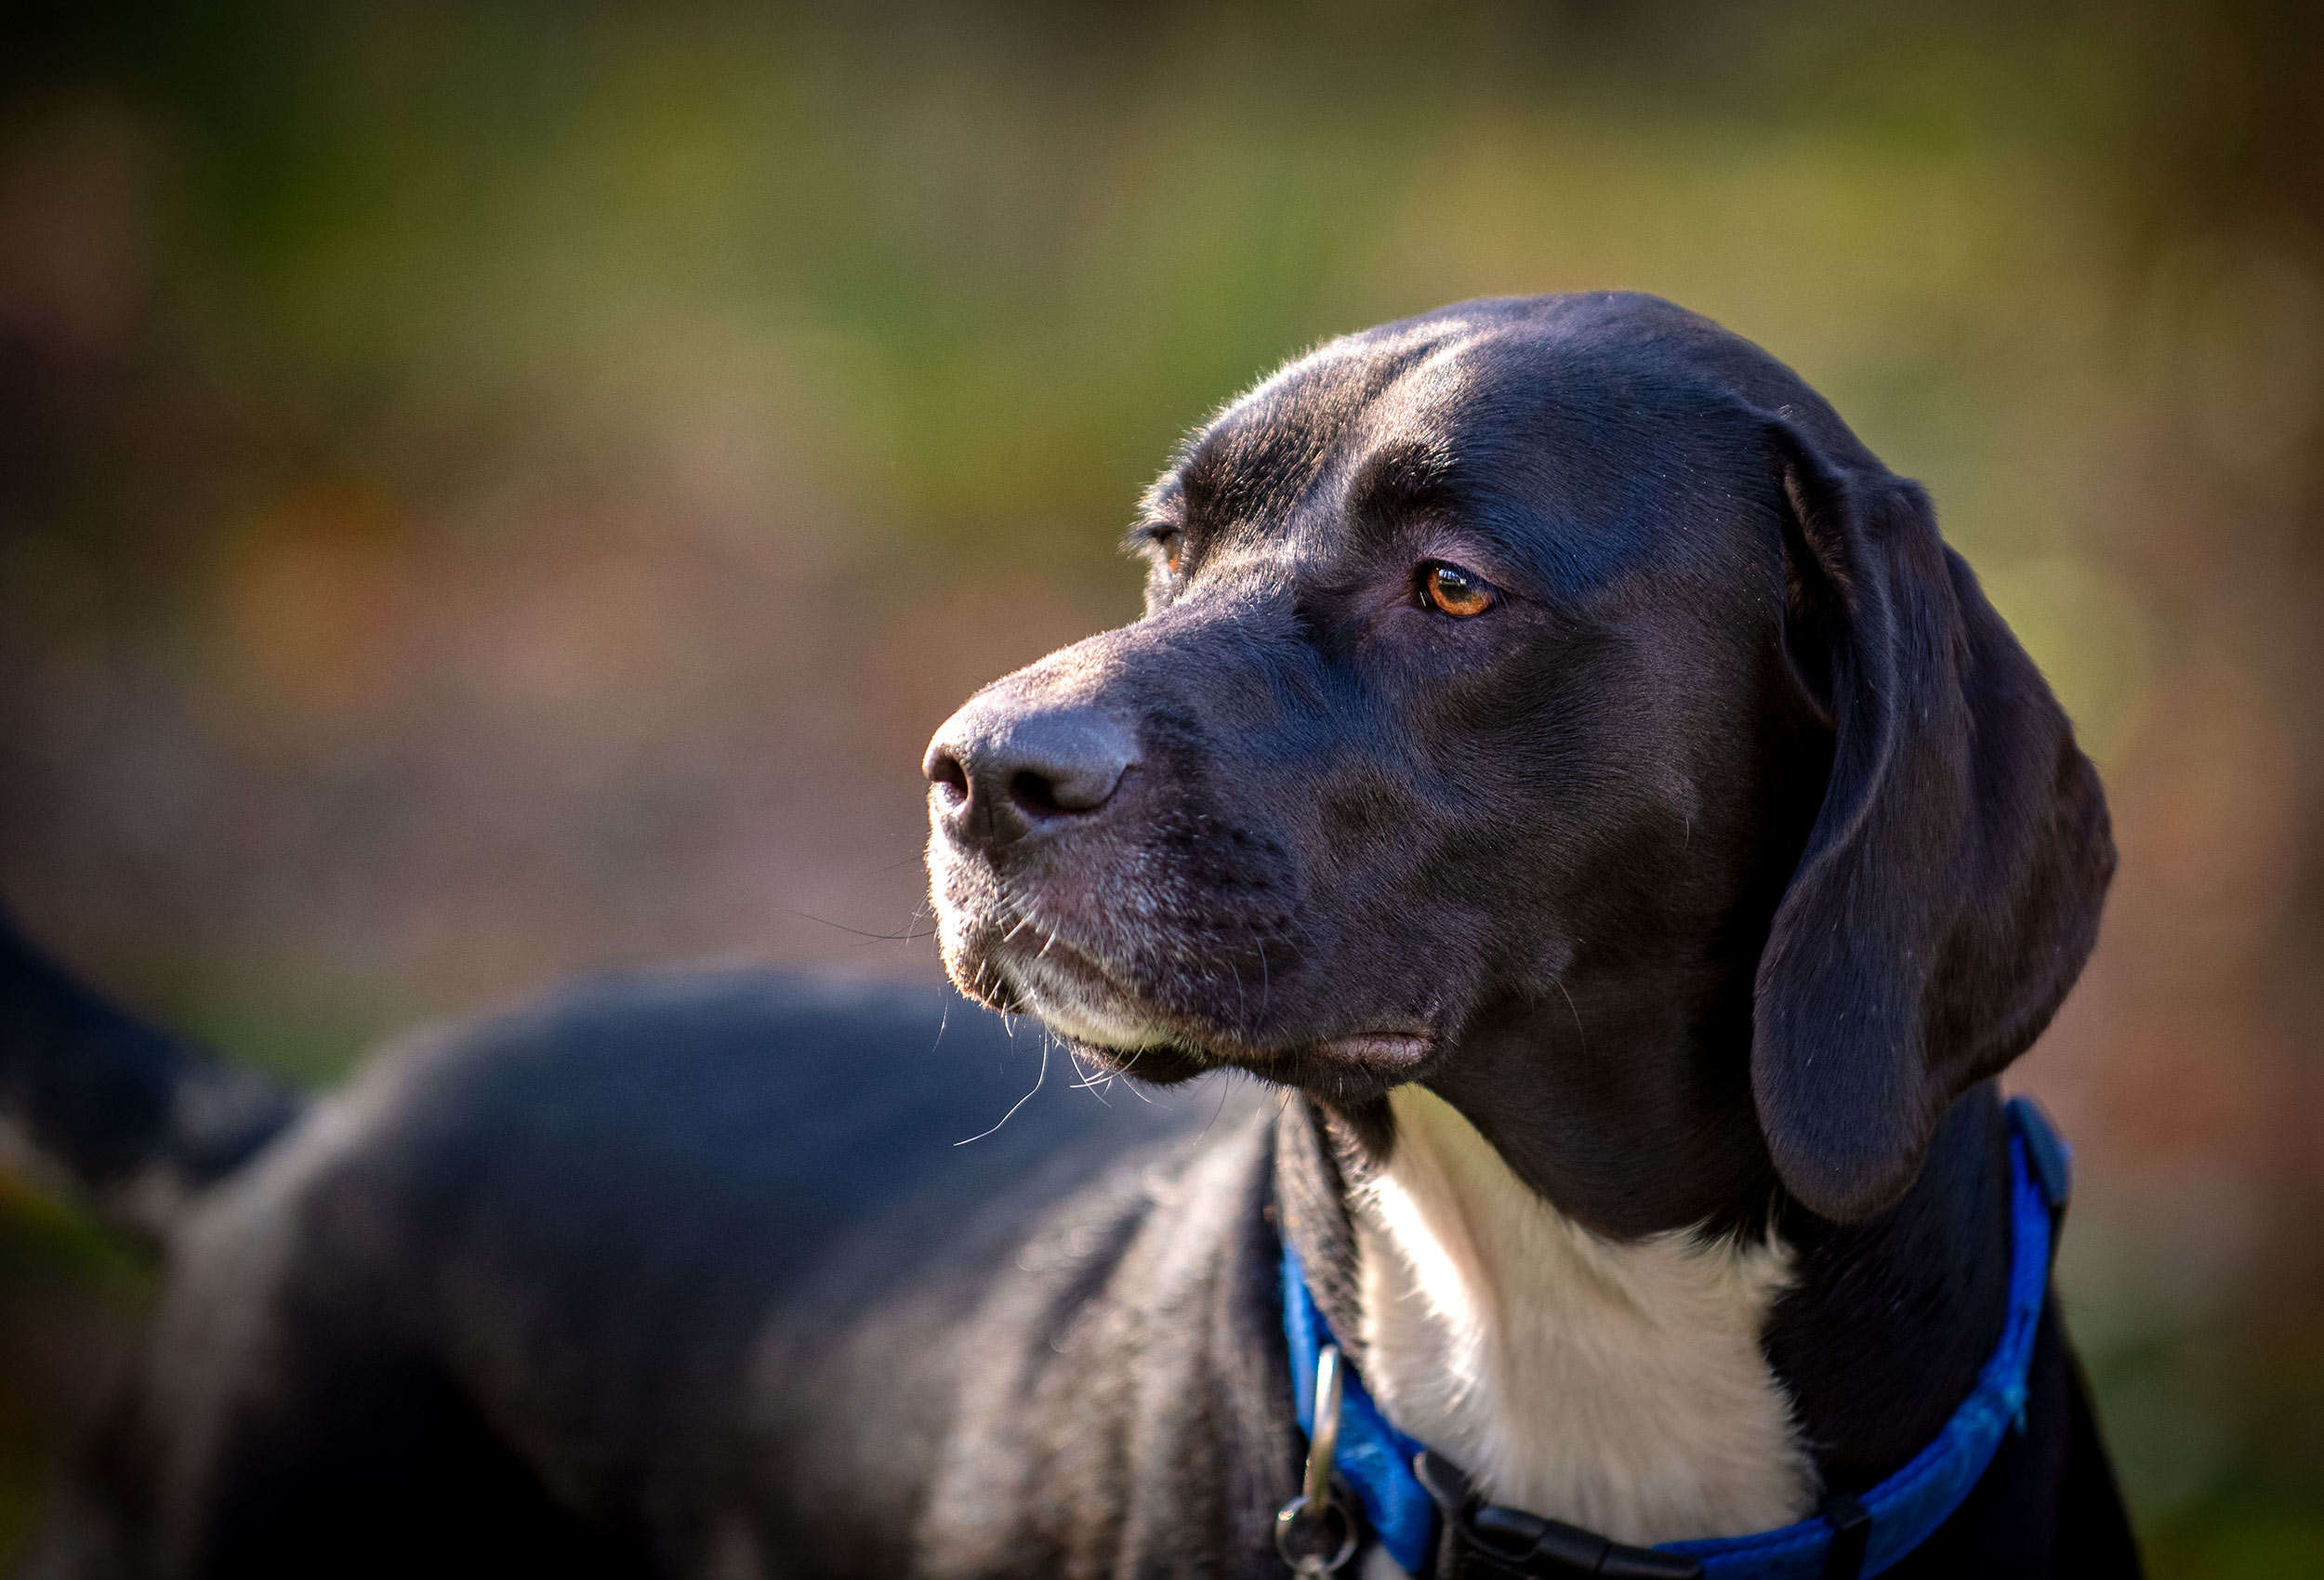 black lab mix dog with blue collar shallow depth of field background